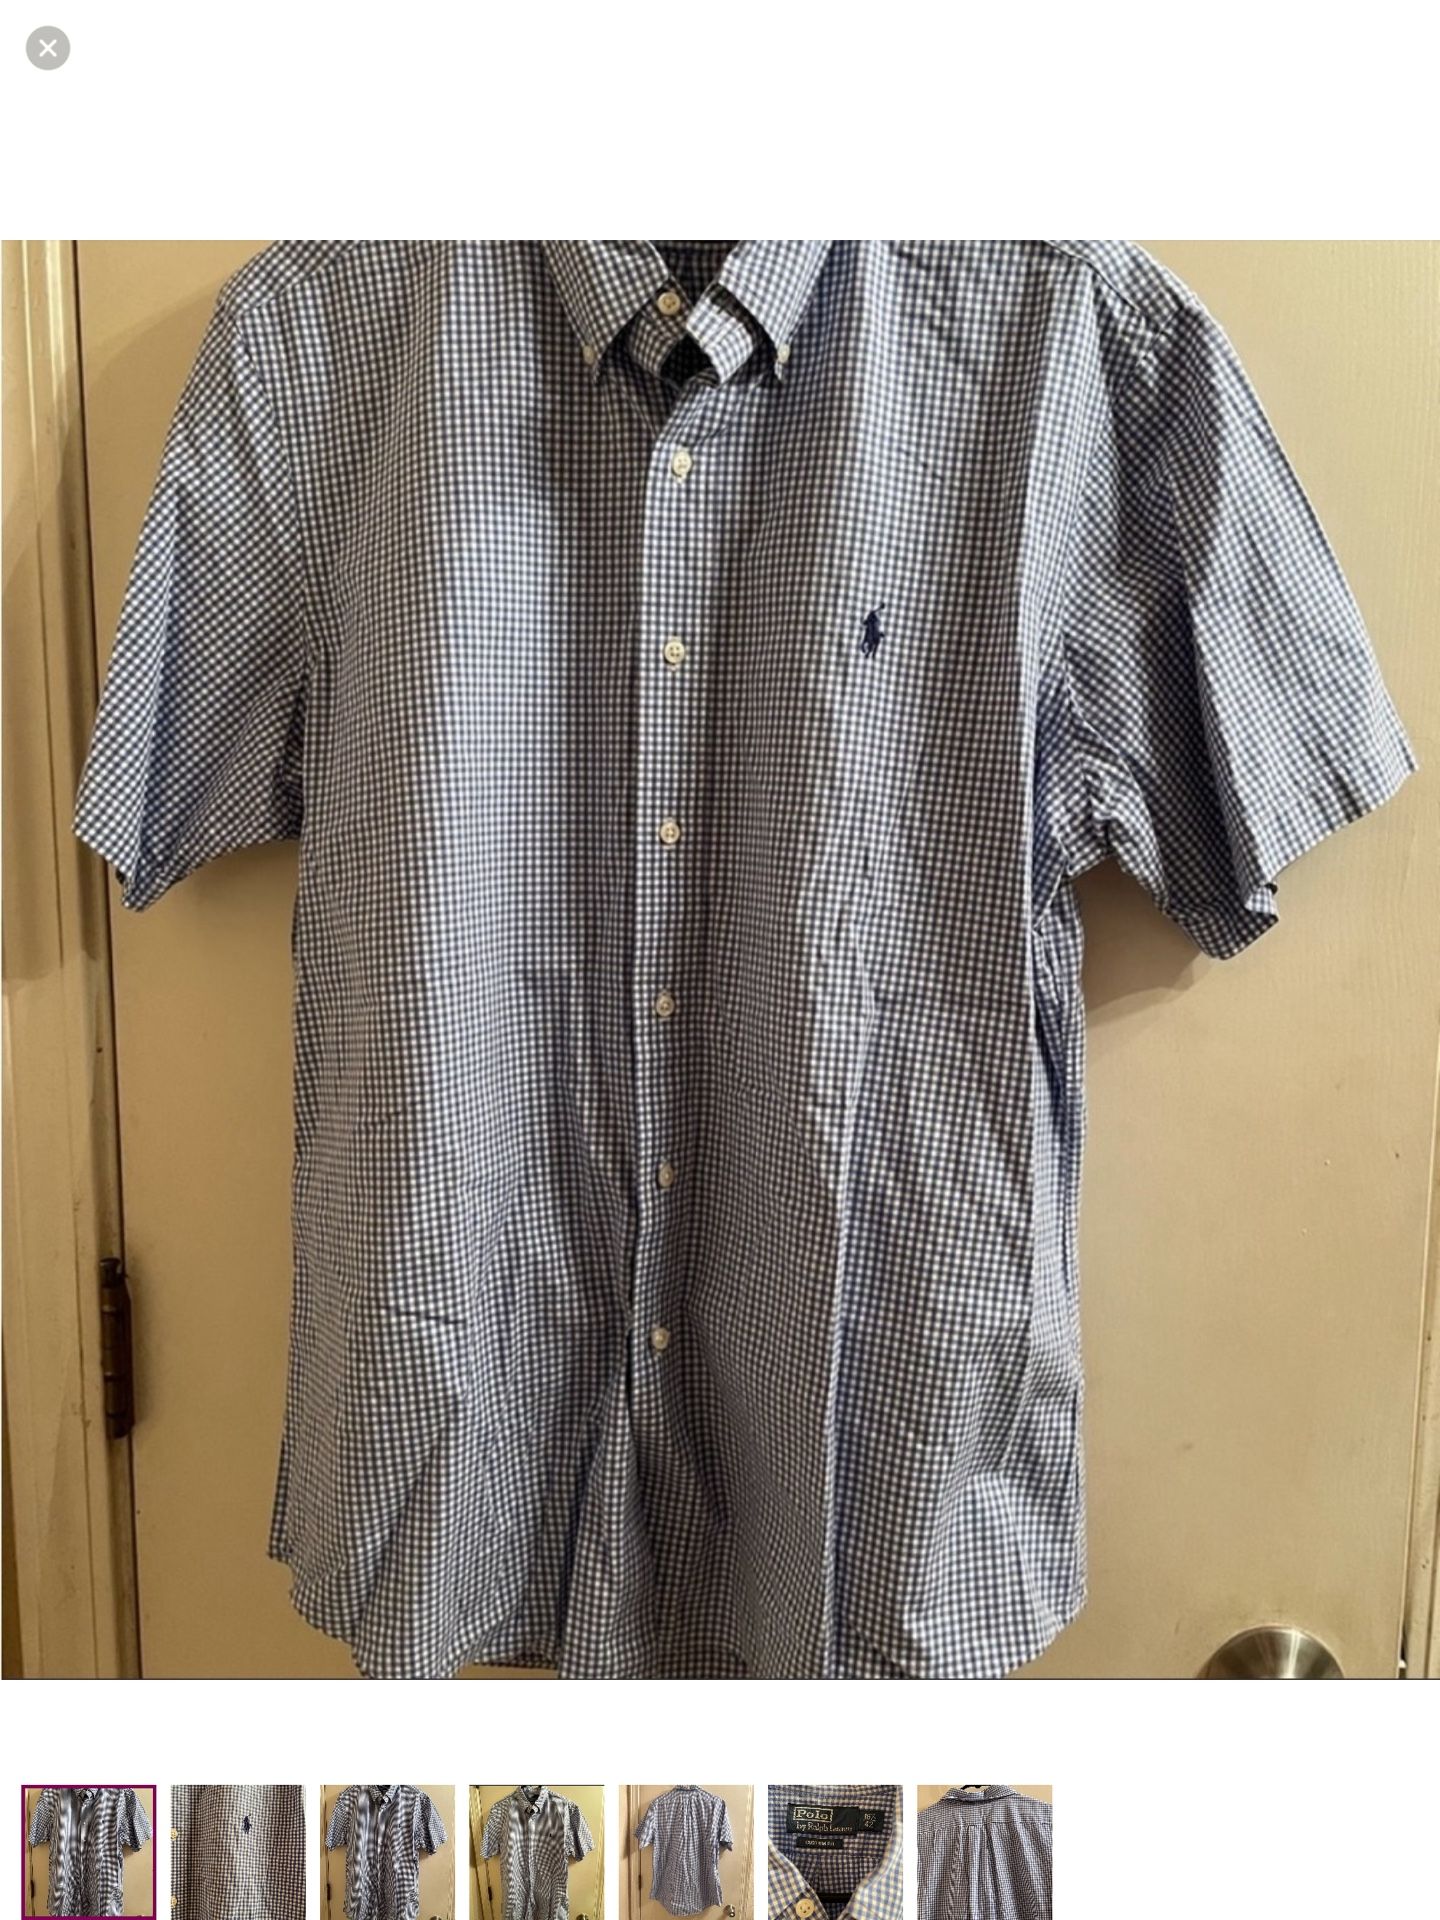 Polo By Ralph Lauren Casual Button Down Shirt Size 16 & 1/2/ /42